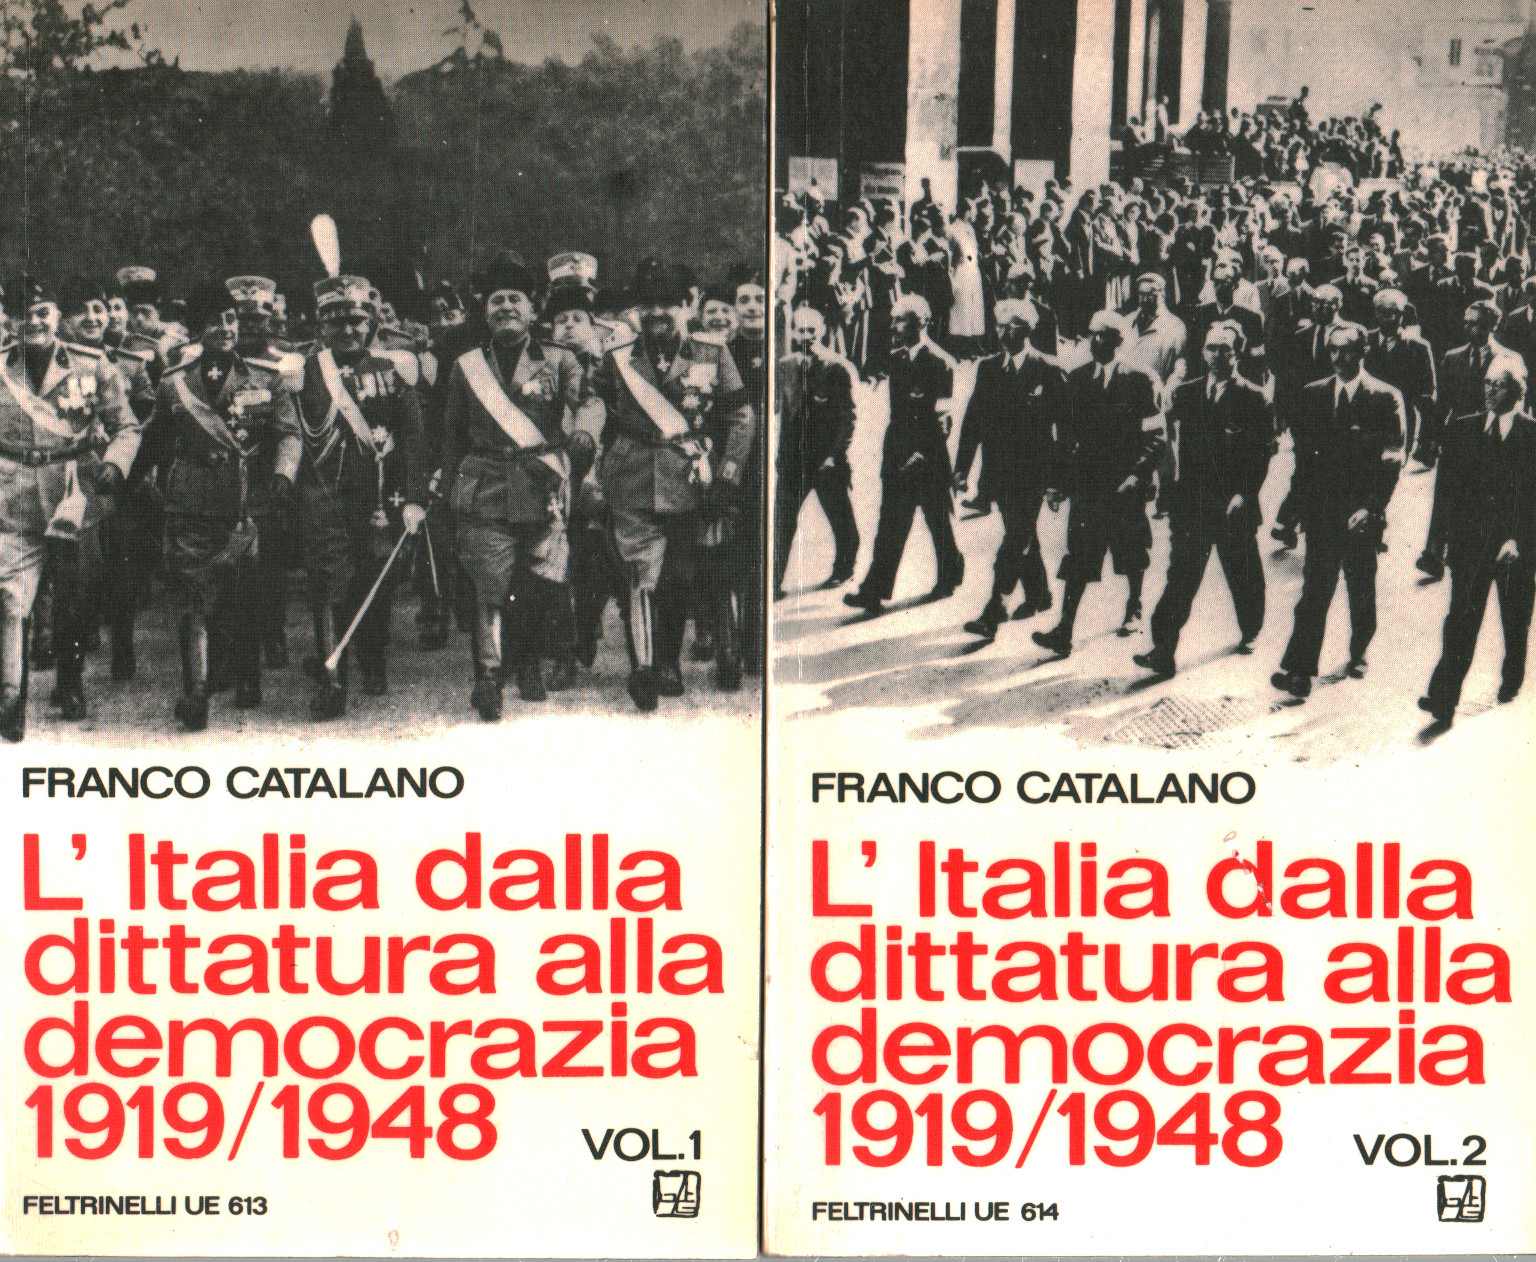 Italy from dictatorship to democracy 1919/194, s.a.